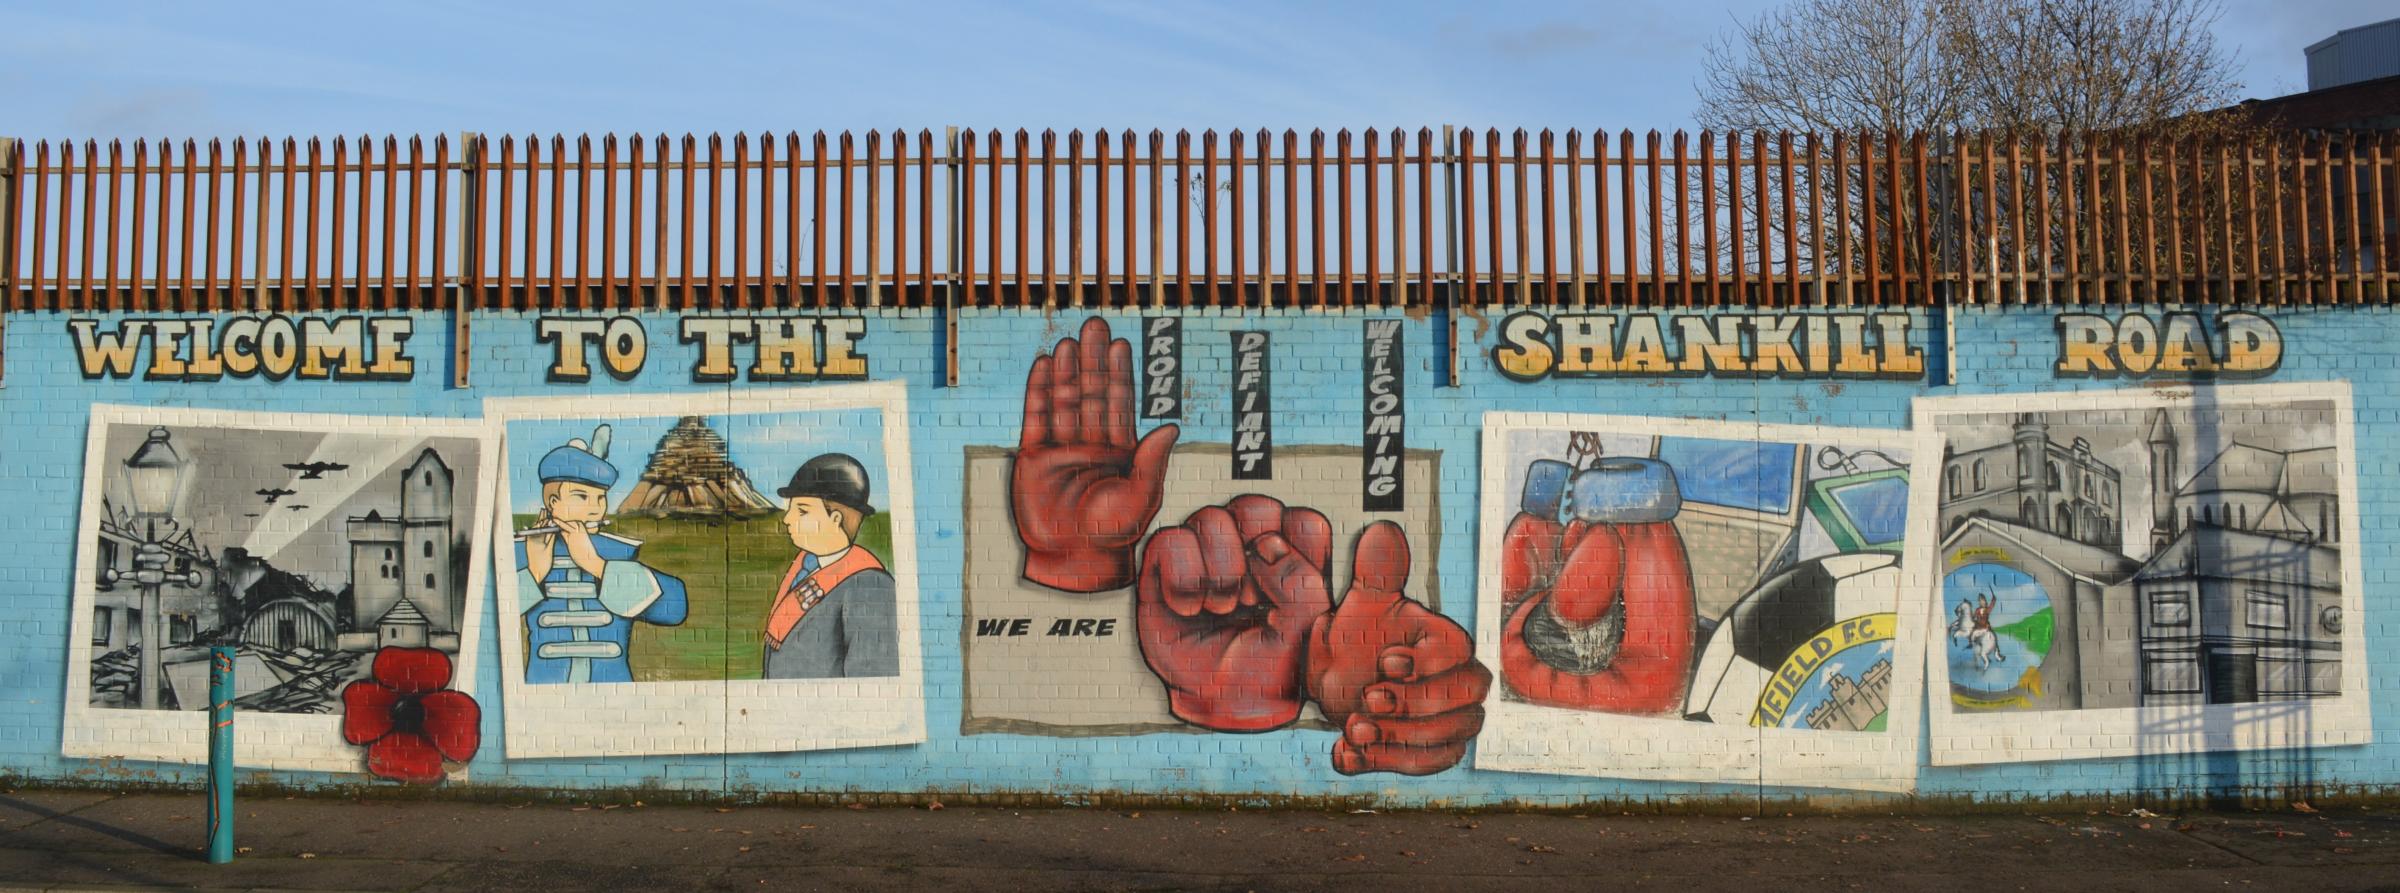 A mural in Shankhill Road, Belfast. Photo: Pixabay